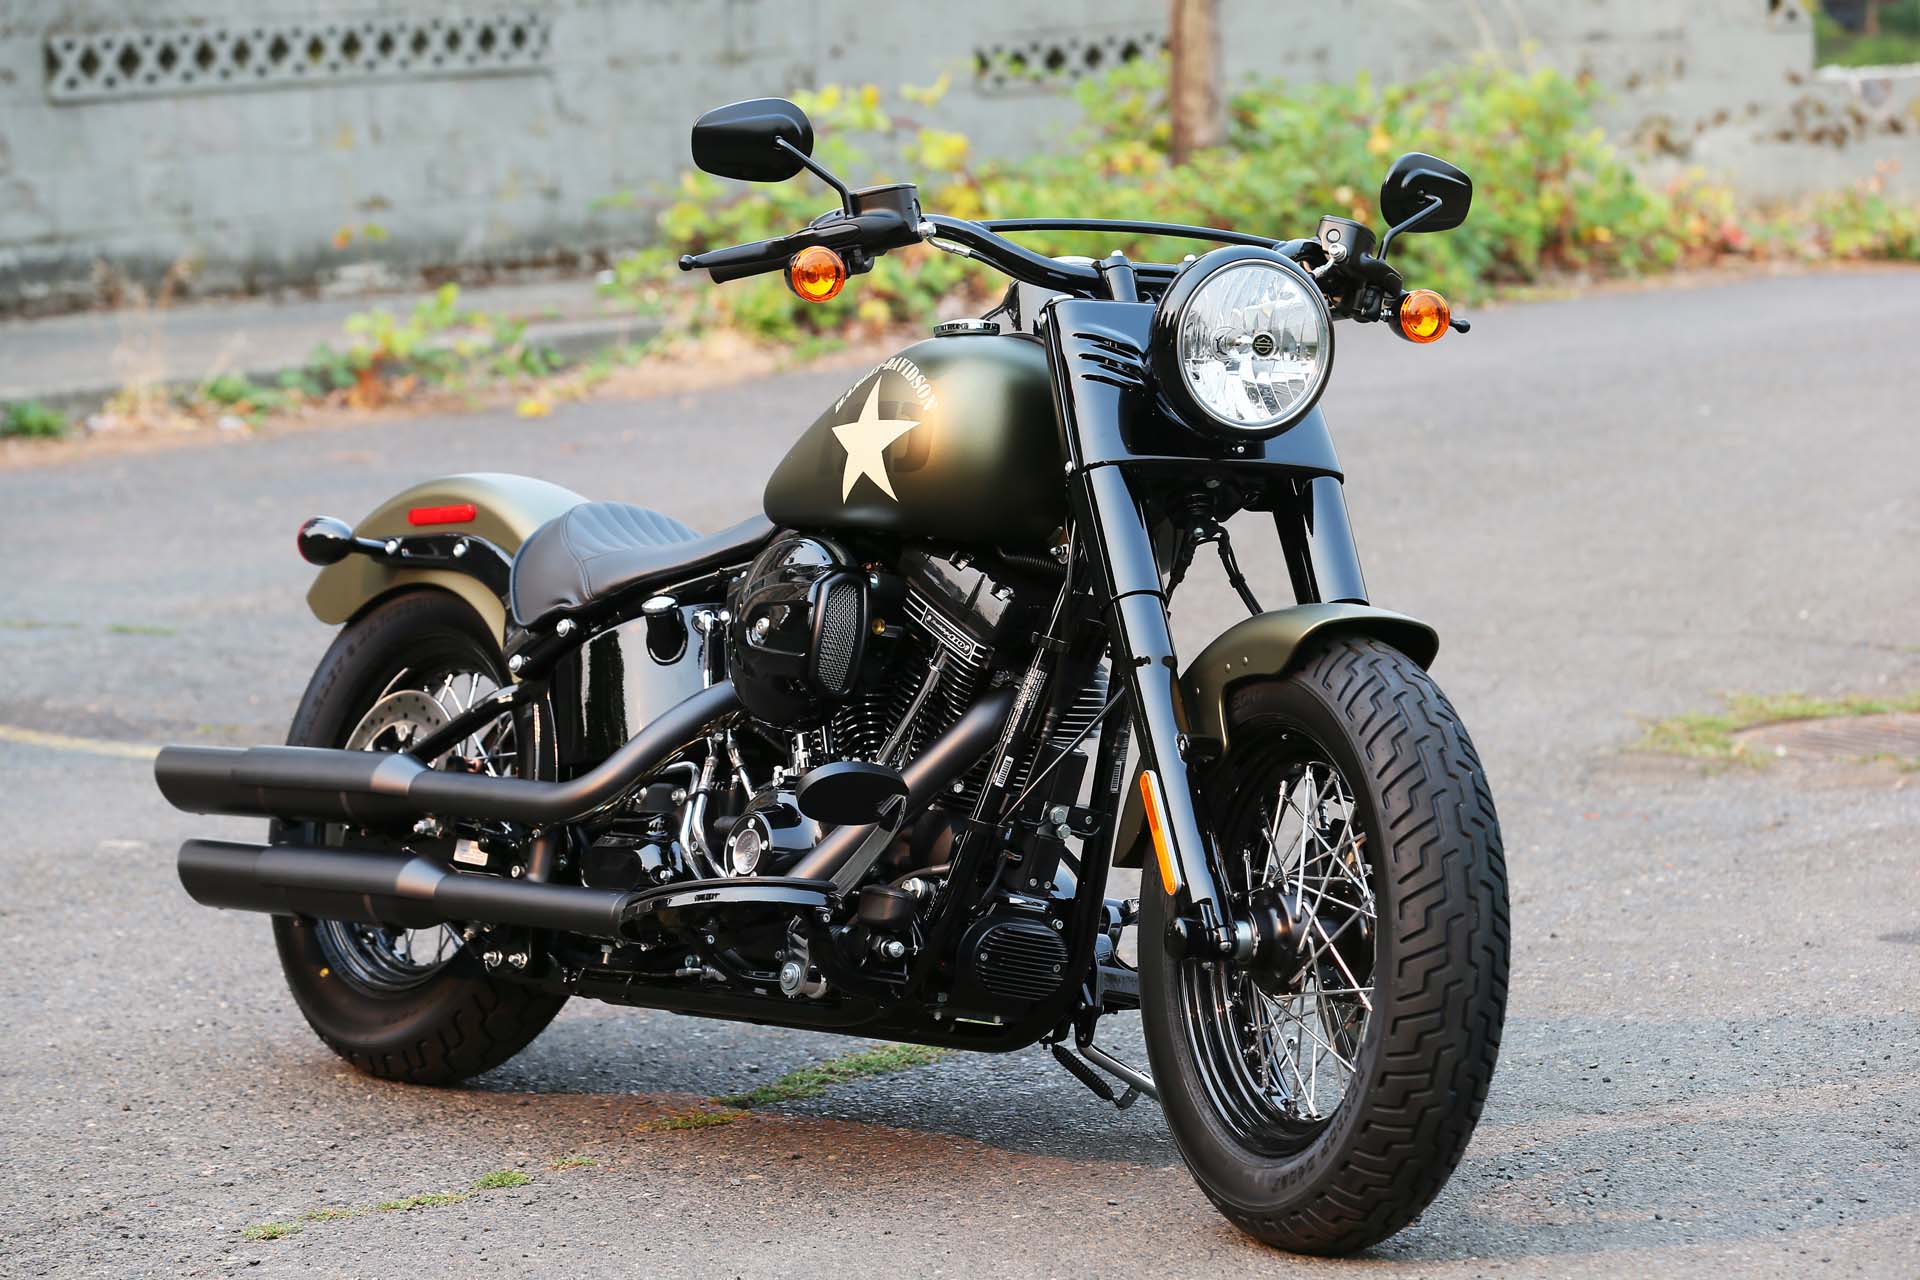 Compared to its non-S equivalent the Softail Slim S is completely blacked out; the only chrome you’ll find is on the pushrod tubes and brake pedal.